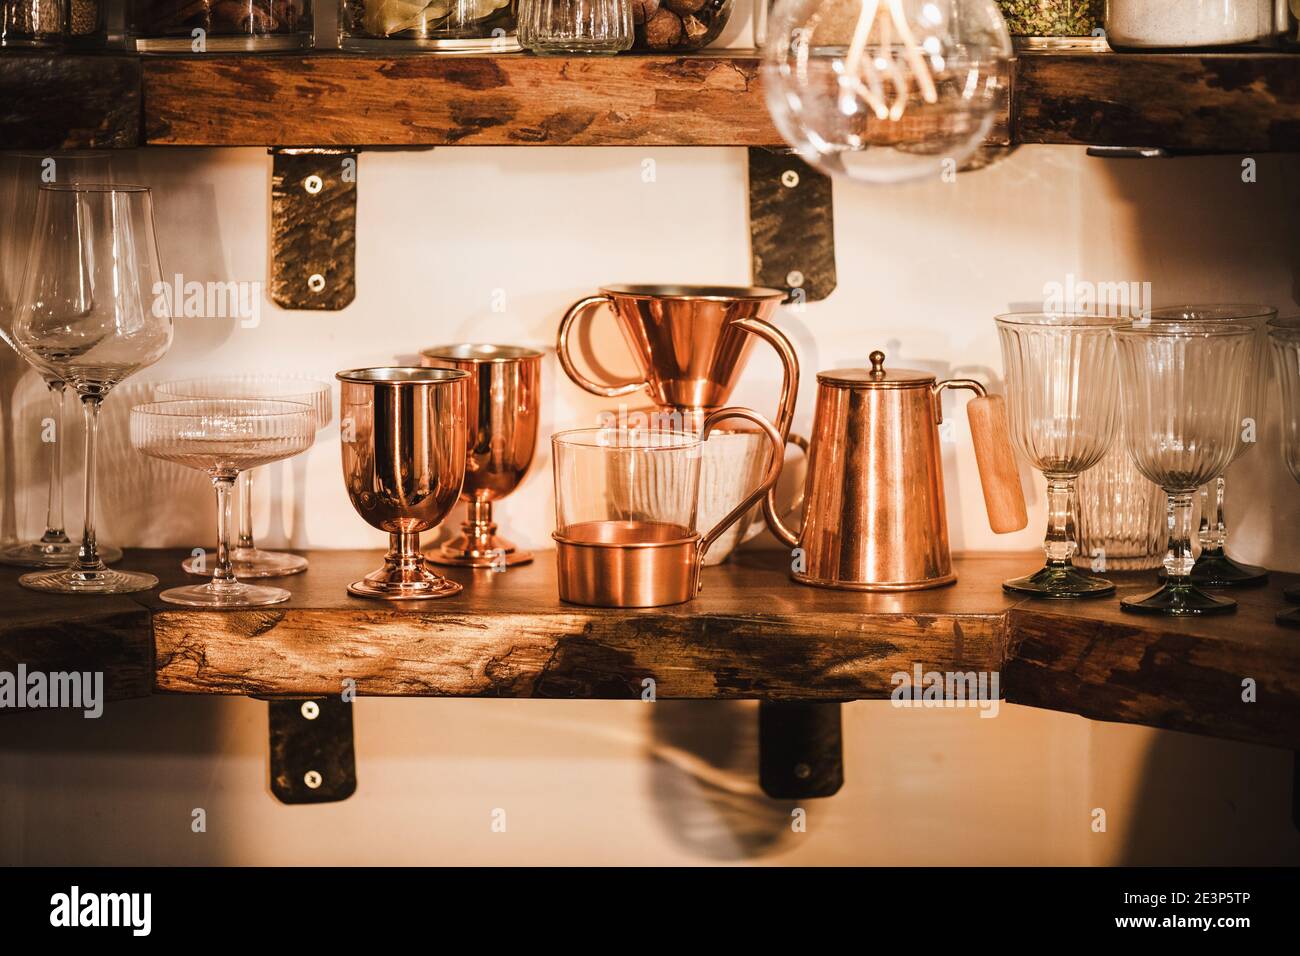 Kitchen shelves with various glass and copper glassware, mugs, tumblers and coffee utencils in beautiful daylight, horizontal composition. Interiors detail and lifestyle mood concept Stock Photo